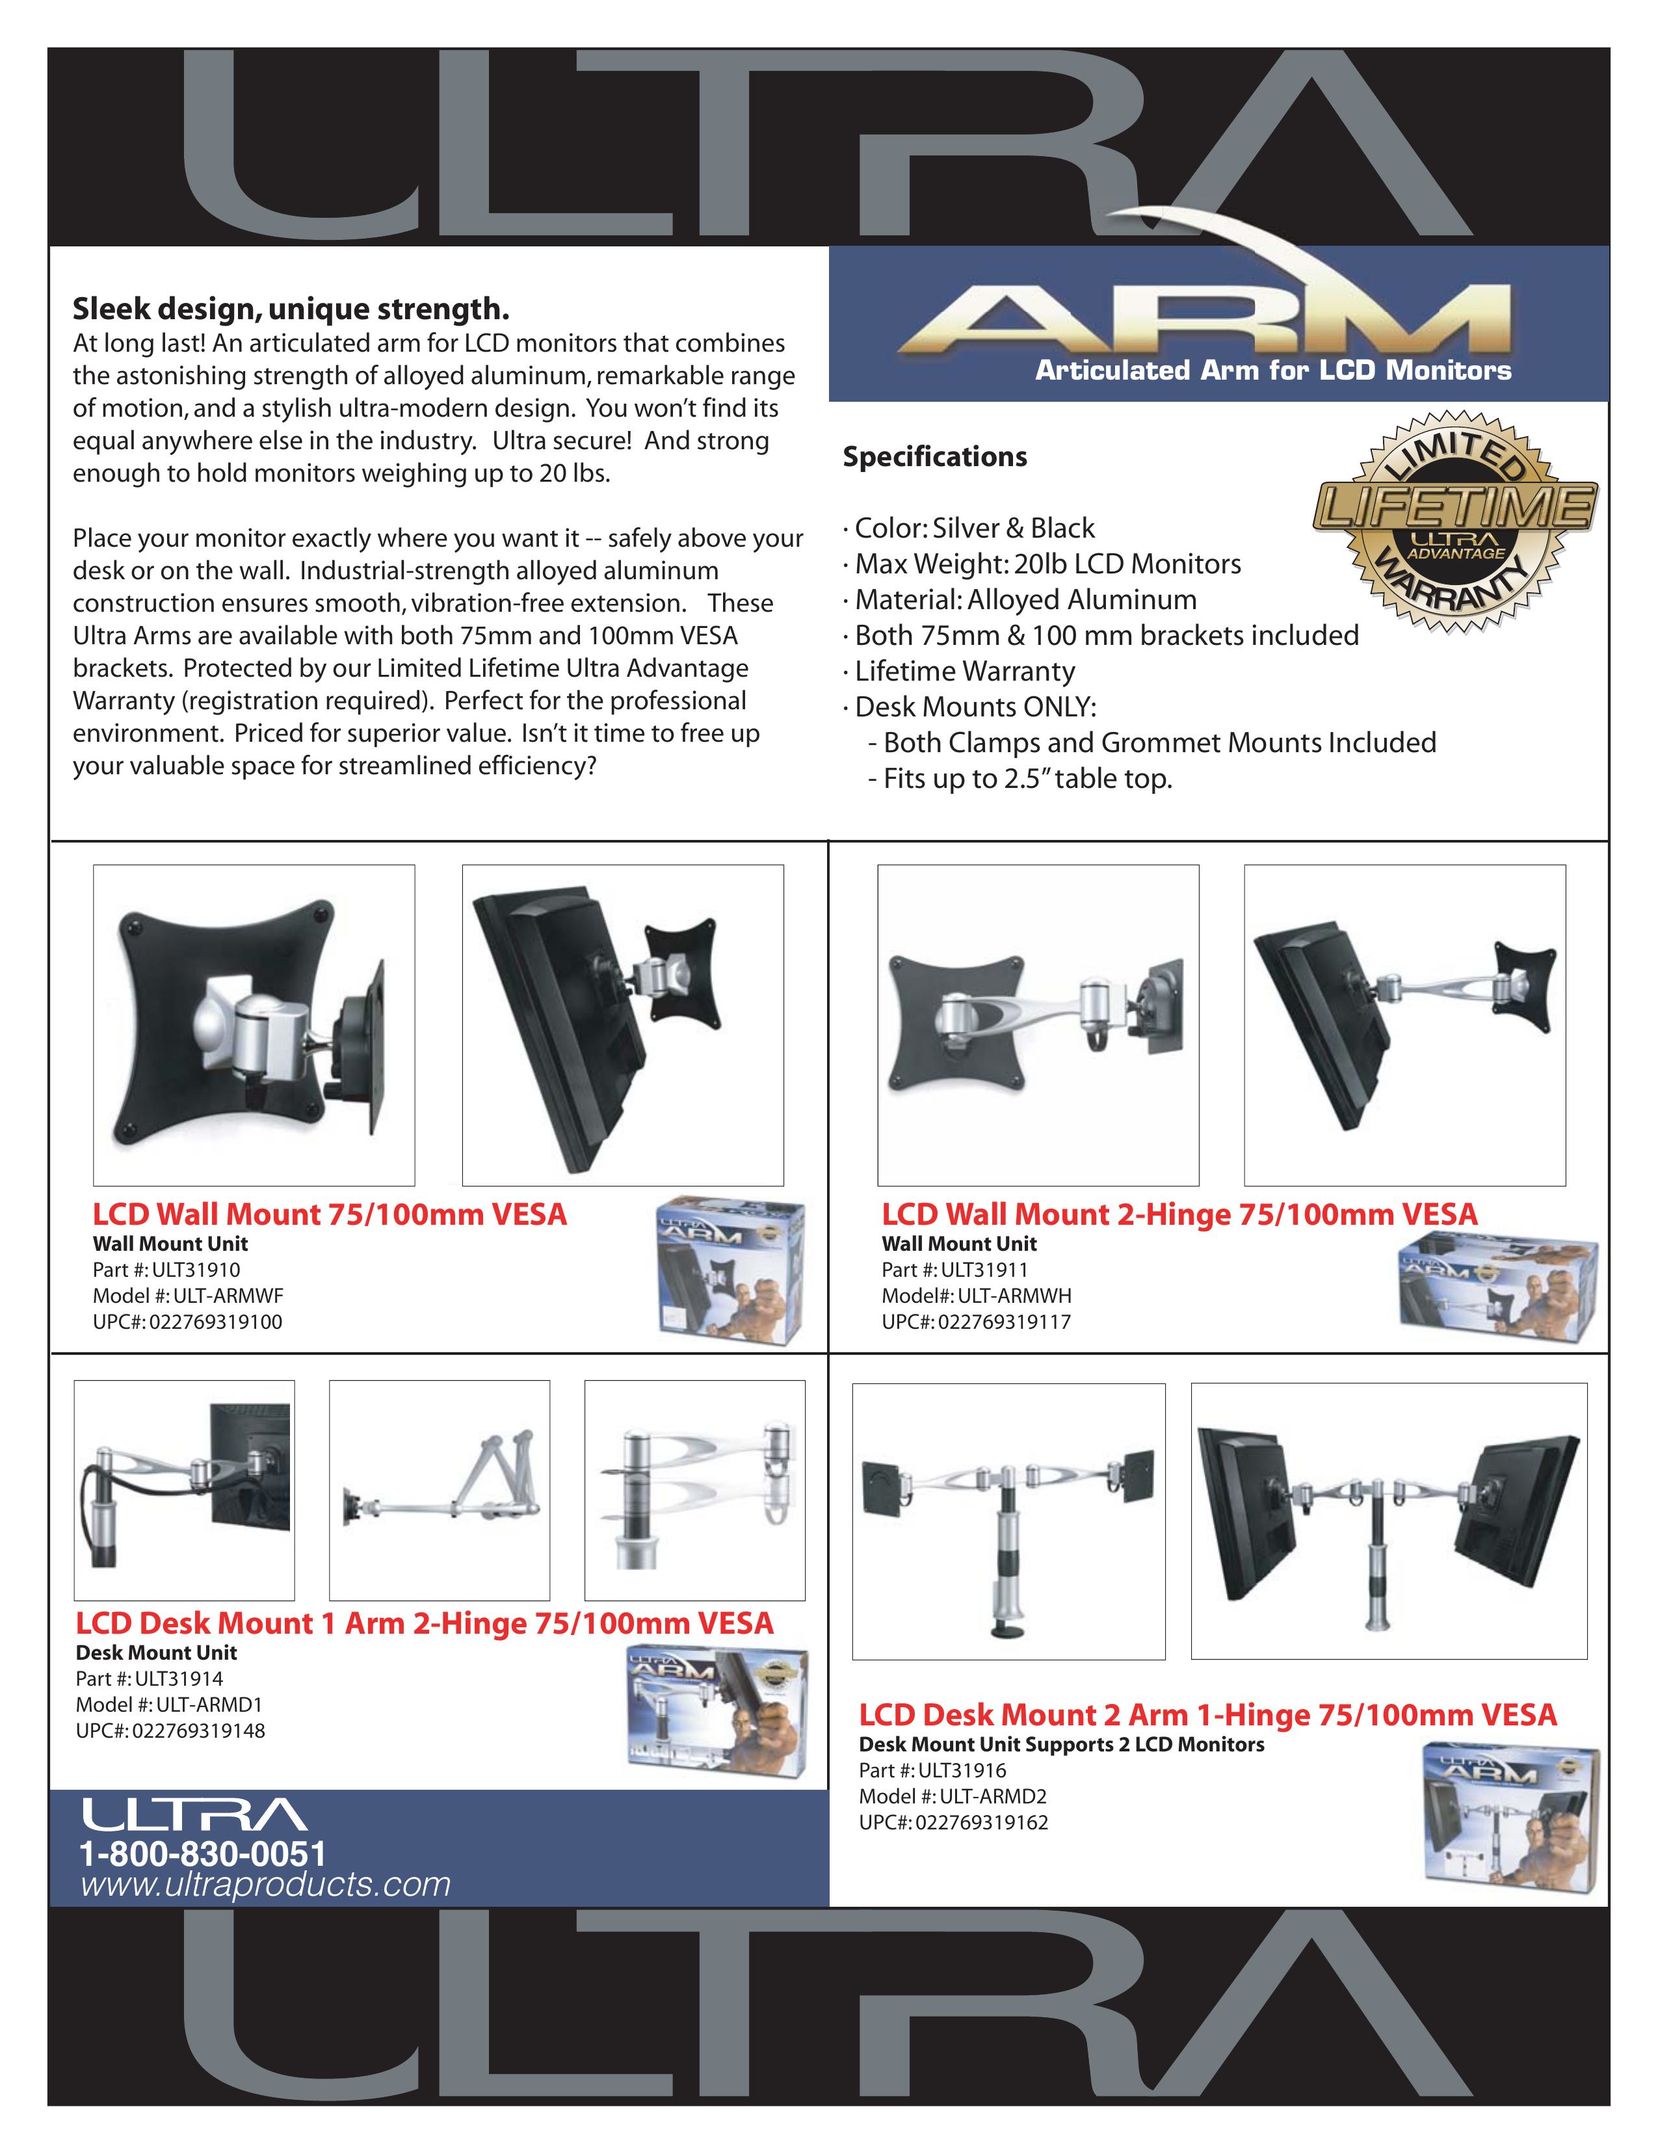 Ultra Products ULT-ARMD1 Indoor Furnishings User Manual